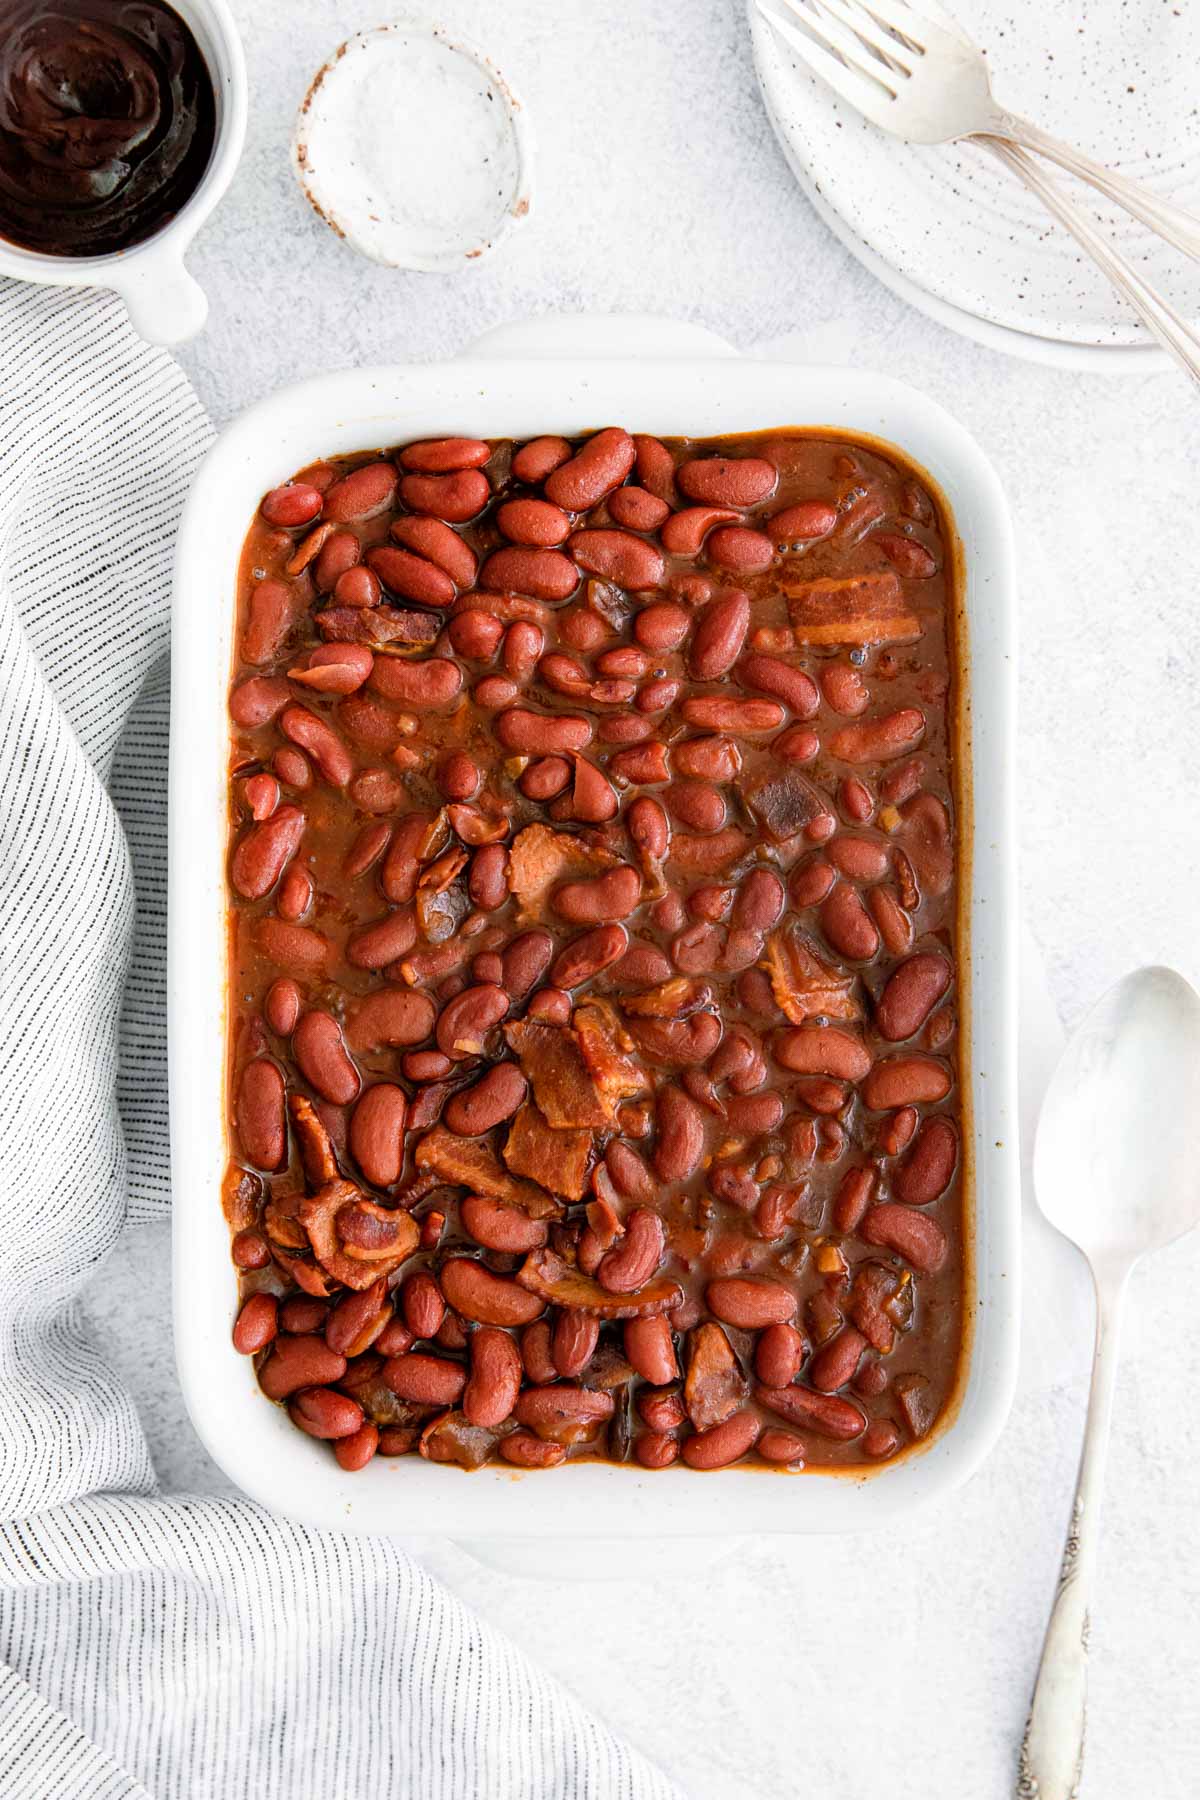 top down view of the completed instant pot baked beans served in a white dish with a serving spoon on the side